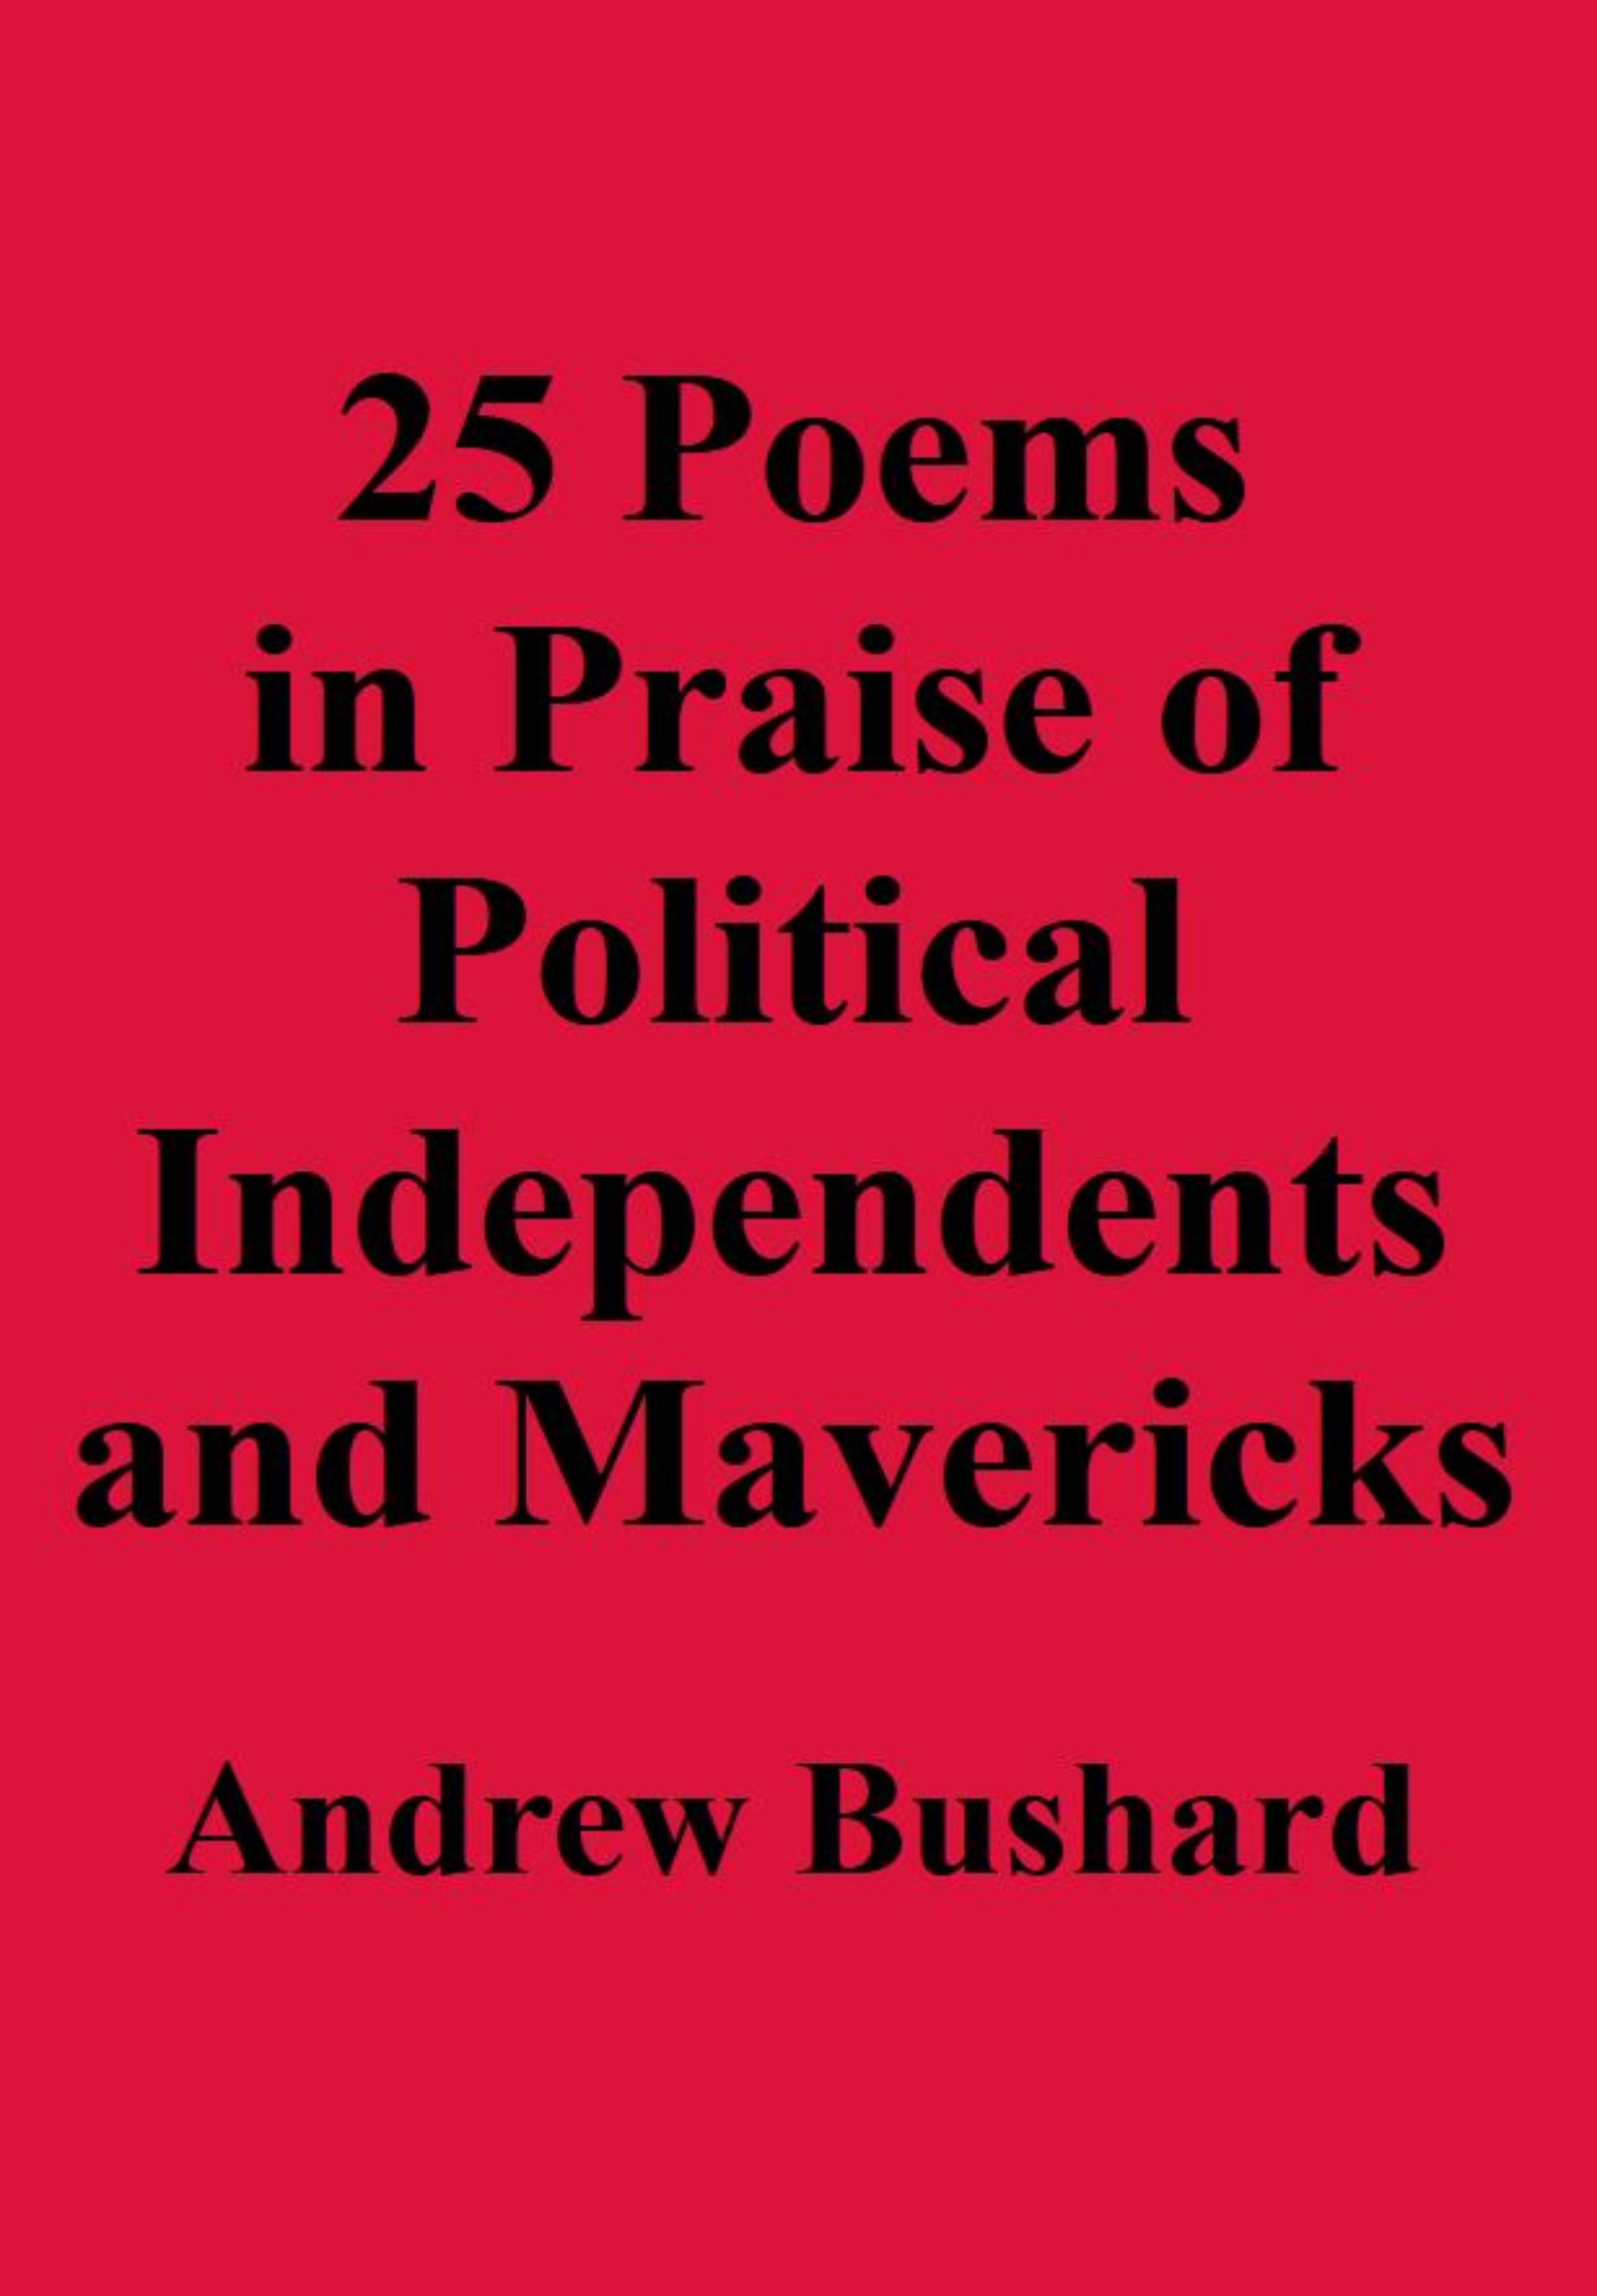 25 Poems in Praise of Political Independents and Mavericks's featured image